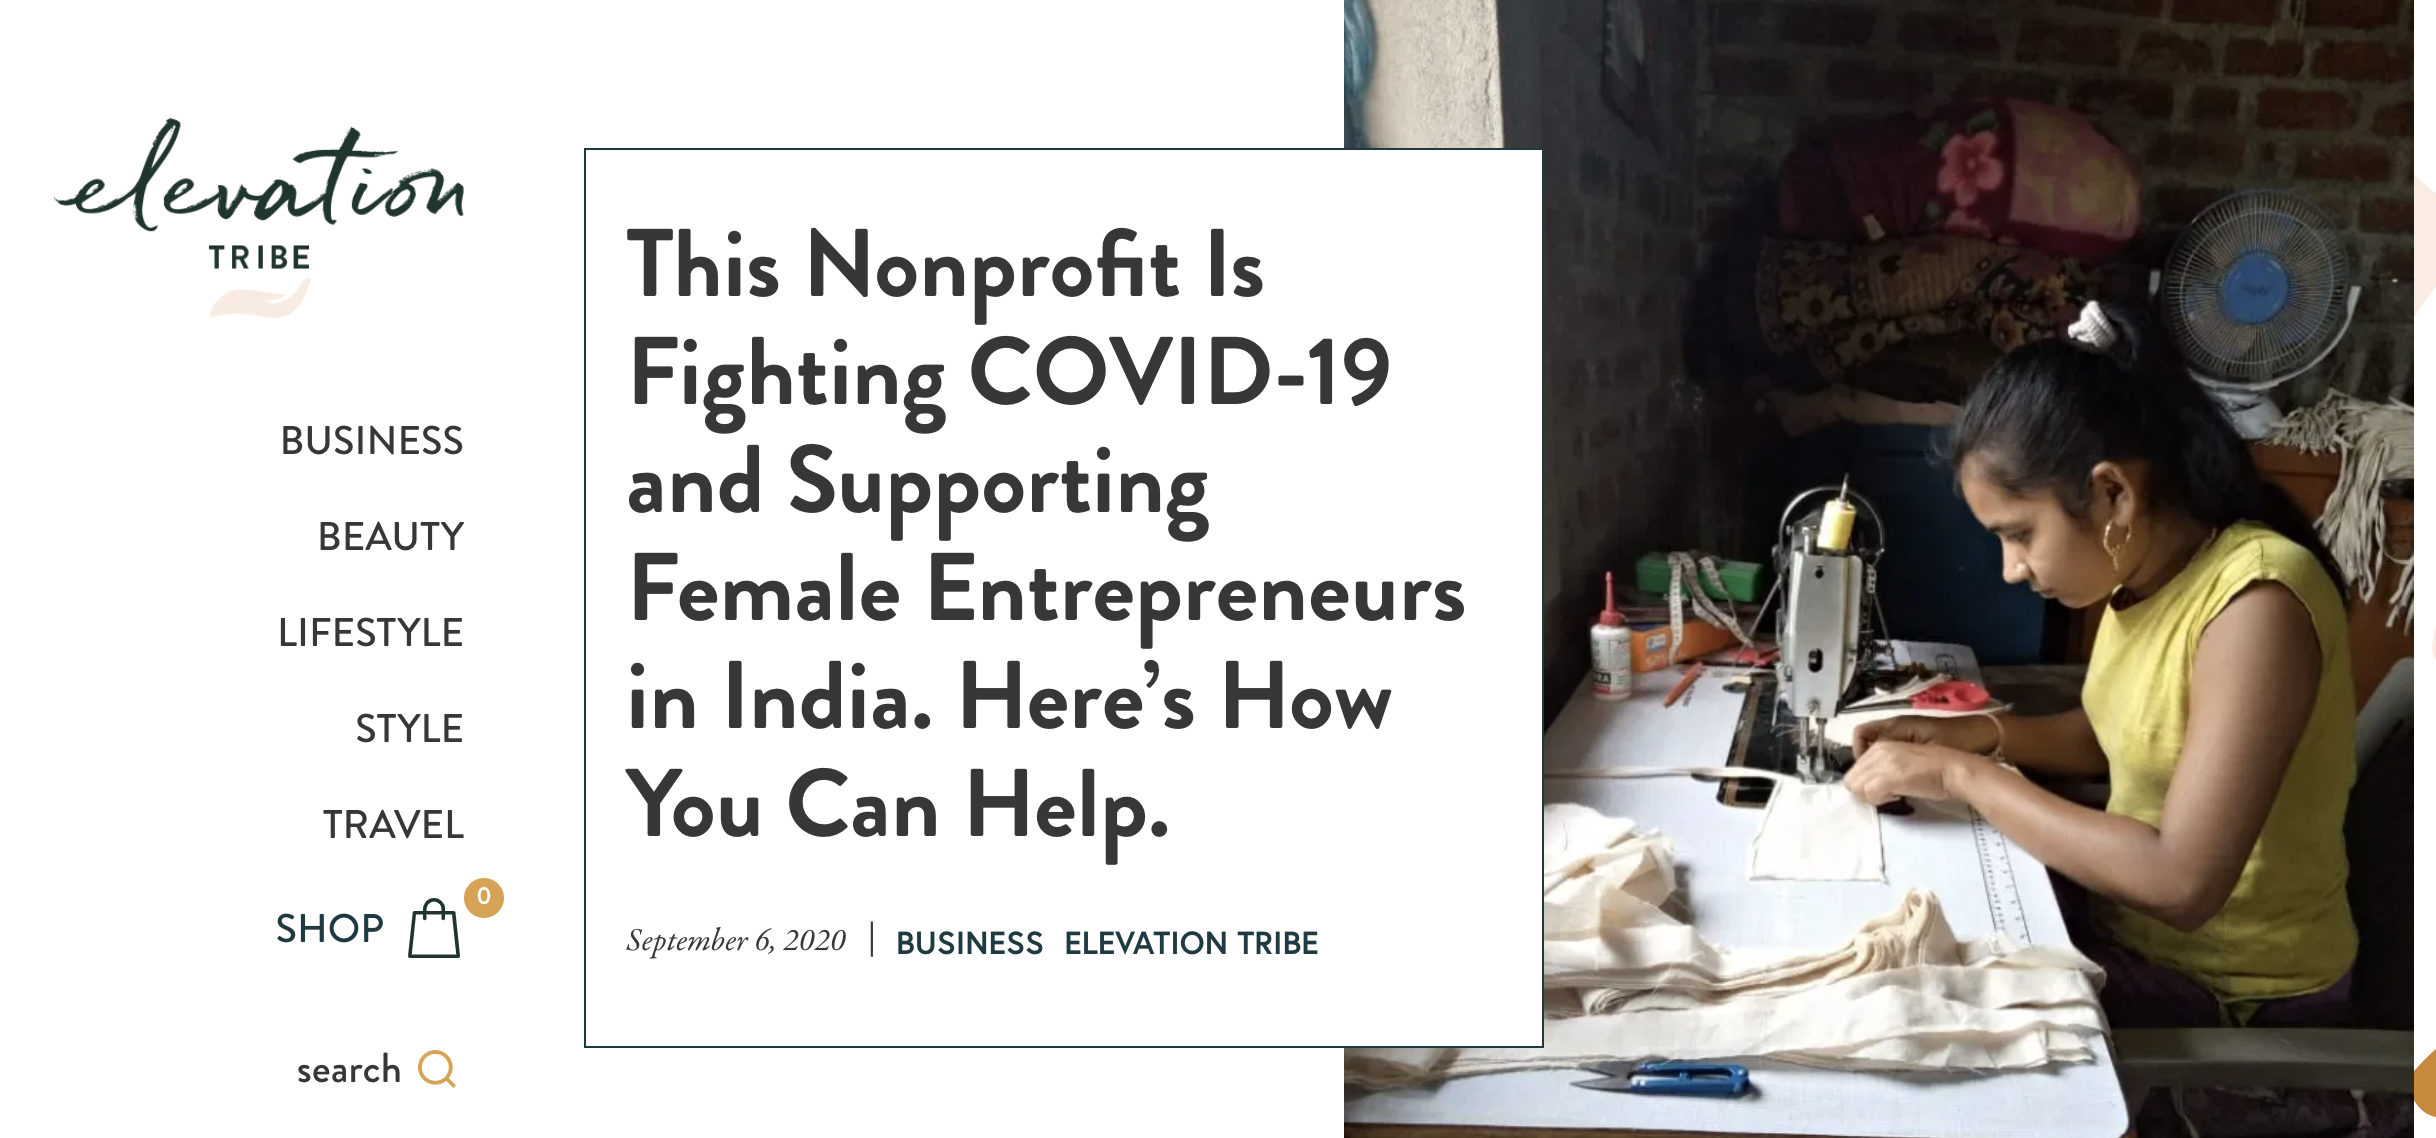 This Nonprofit Is Fighting COVID-19 and Supporting Female Entrepreneurs in India